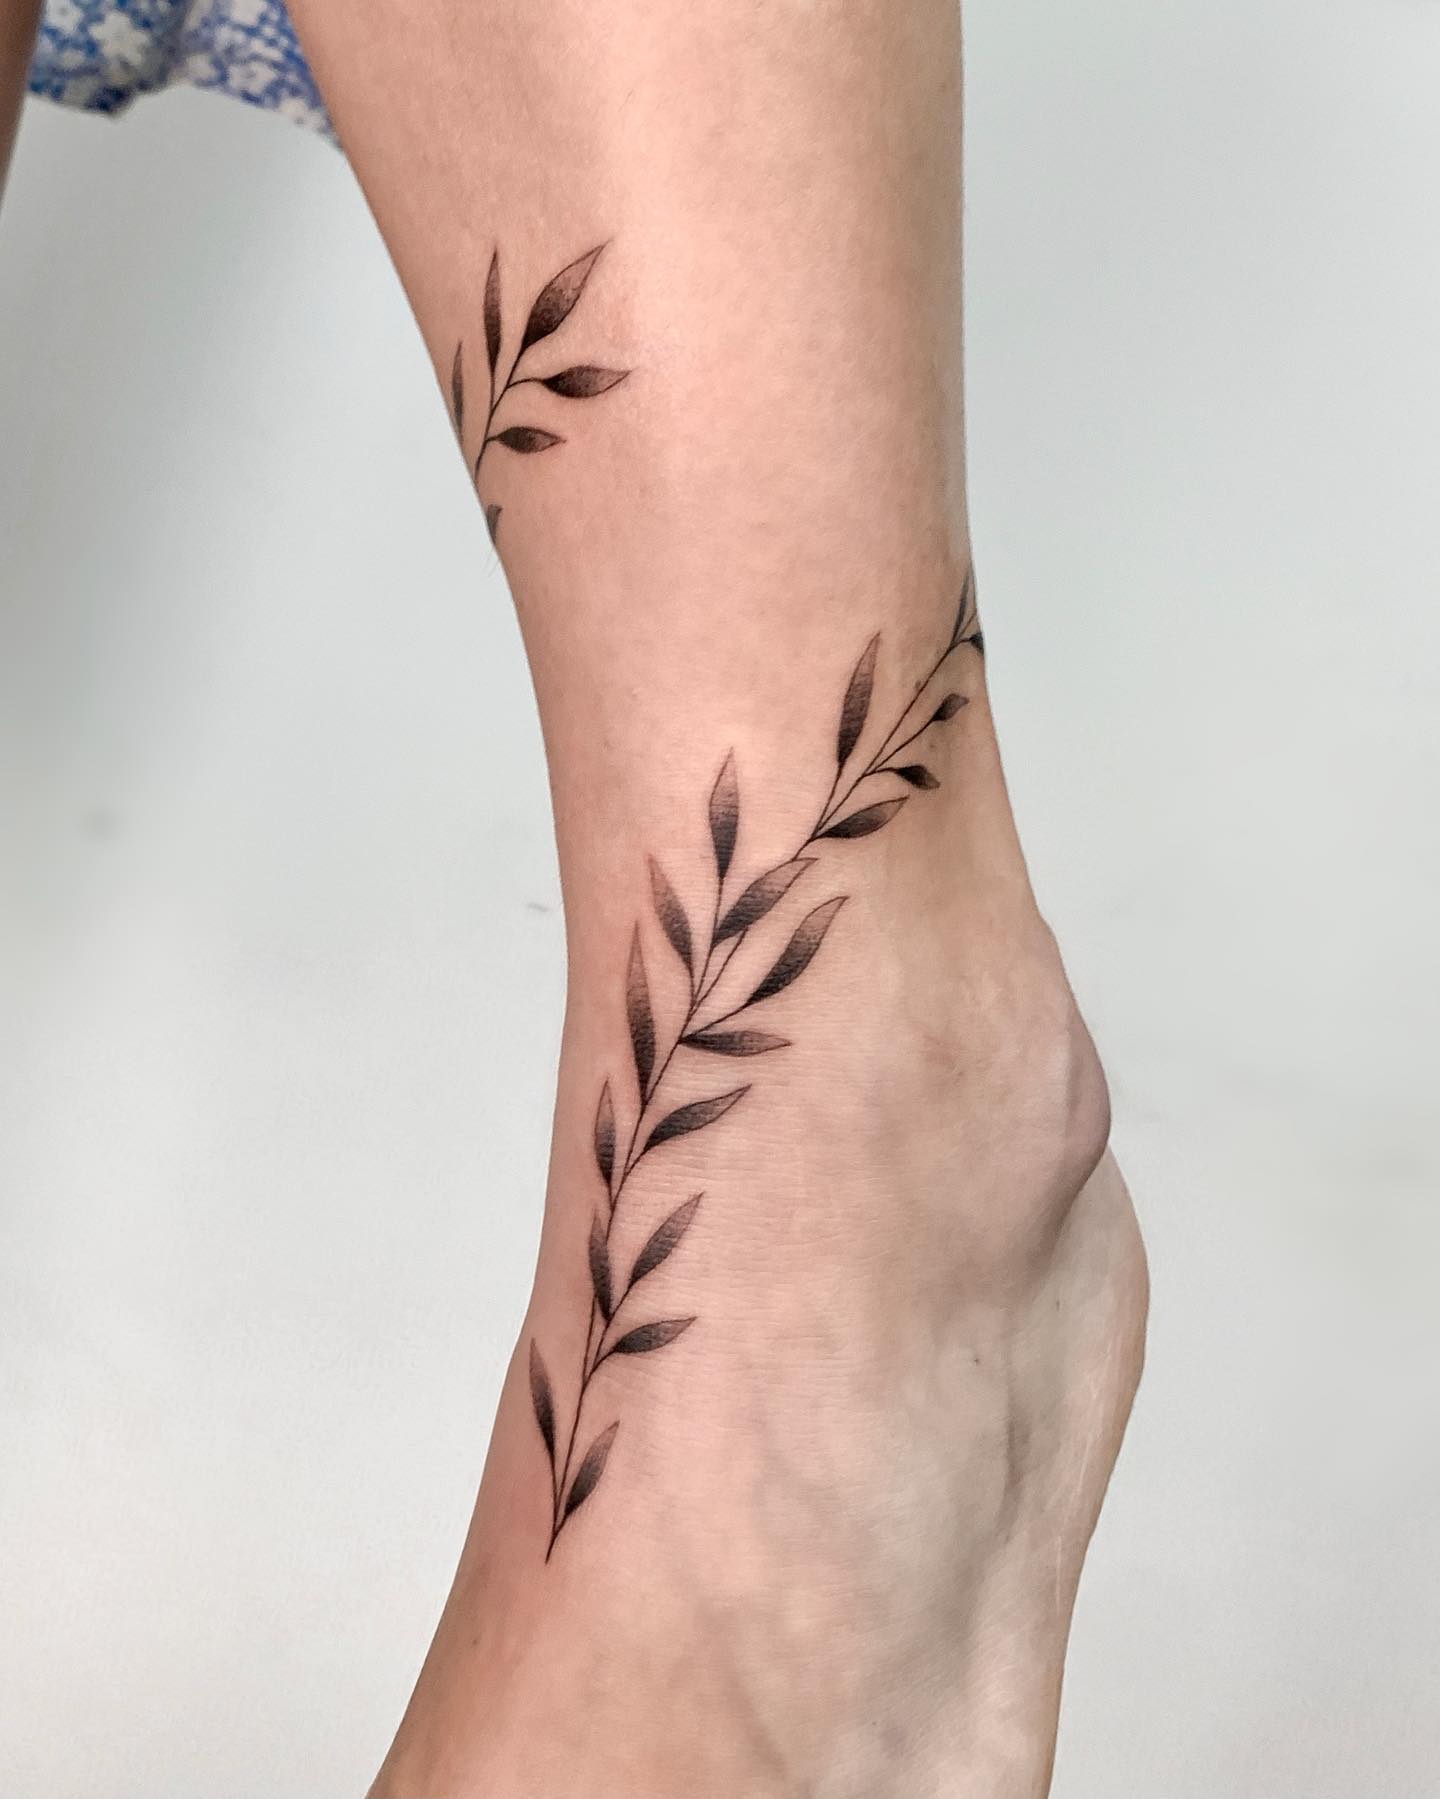 Several leaves going around your ankle can show your tight and close nature. If you’re sure and secure of your moves and you are a confident person, book this design.